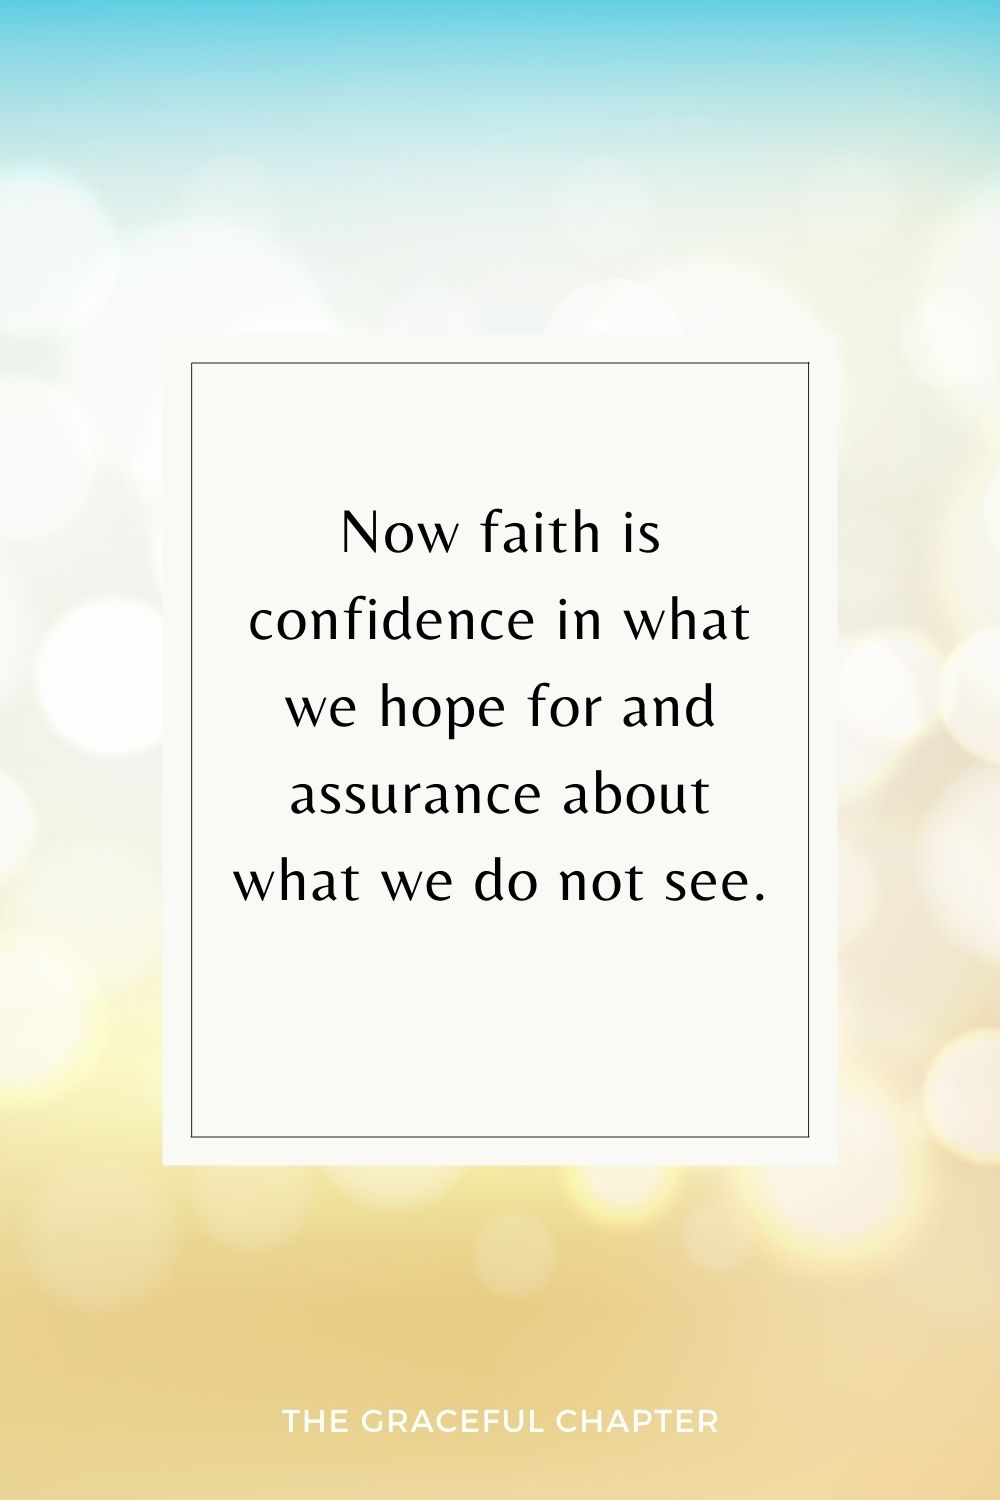 Now faith is confidence in what we hope for and assurance about what we do not see. Hebrews 11:1